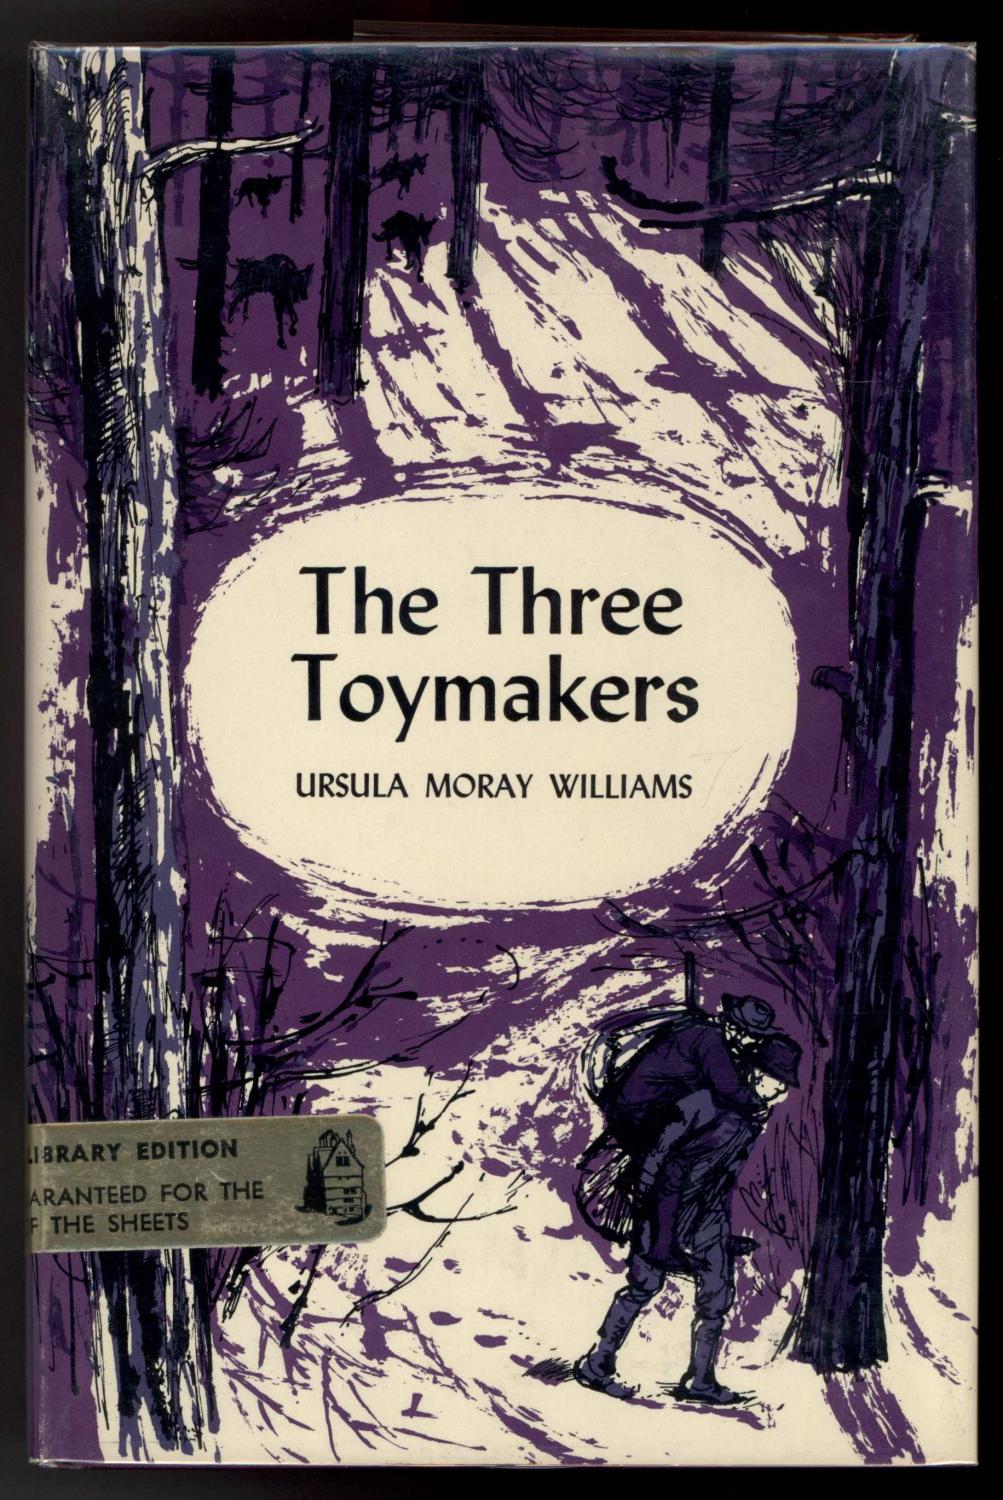 The Three Toymakers